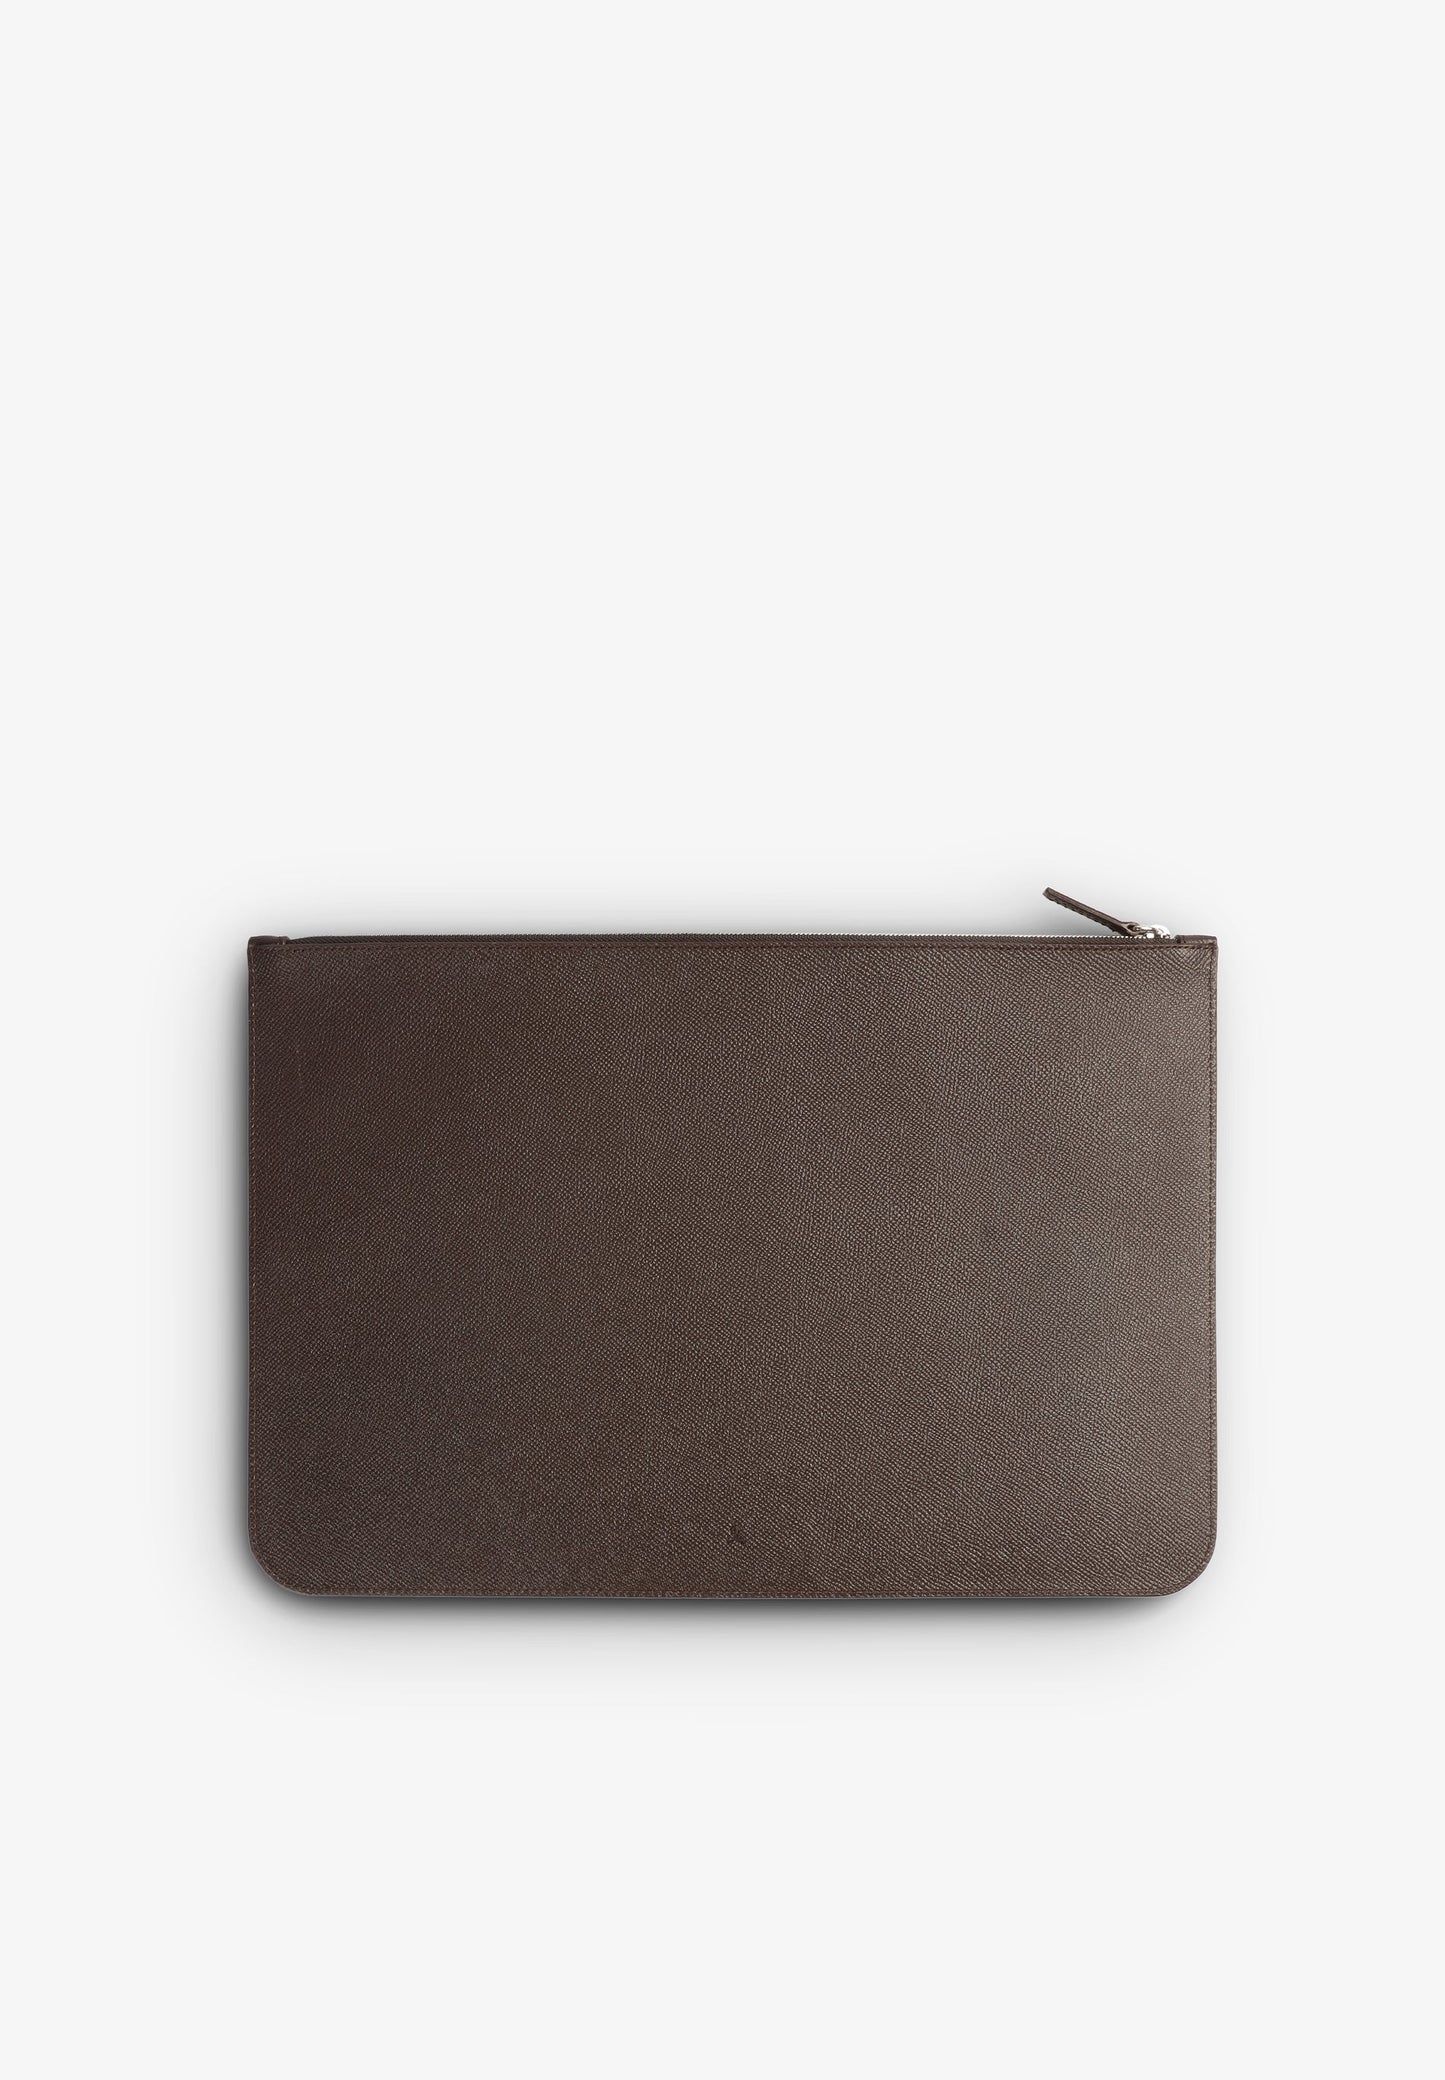 LEATHER DOCUMENT CASE